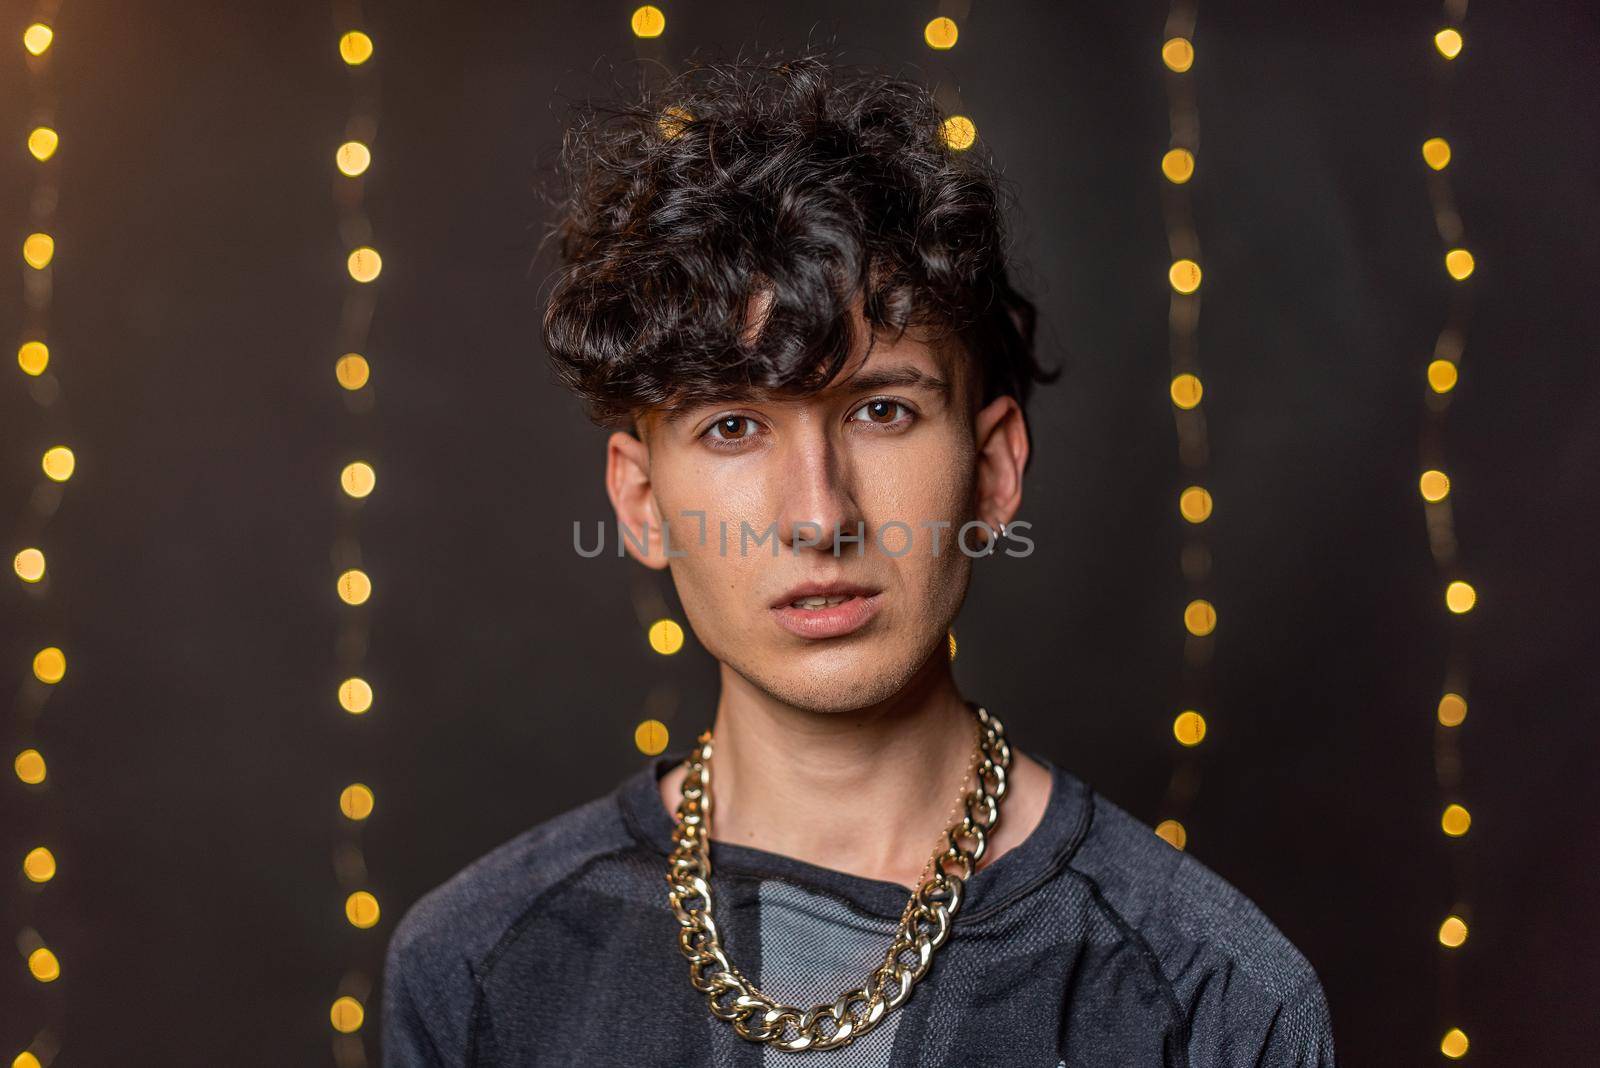 Portrait of a young man looking at the camera without smiling with a gold-colored chain around his neck with a blurred light background